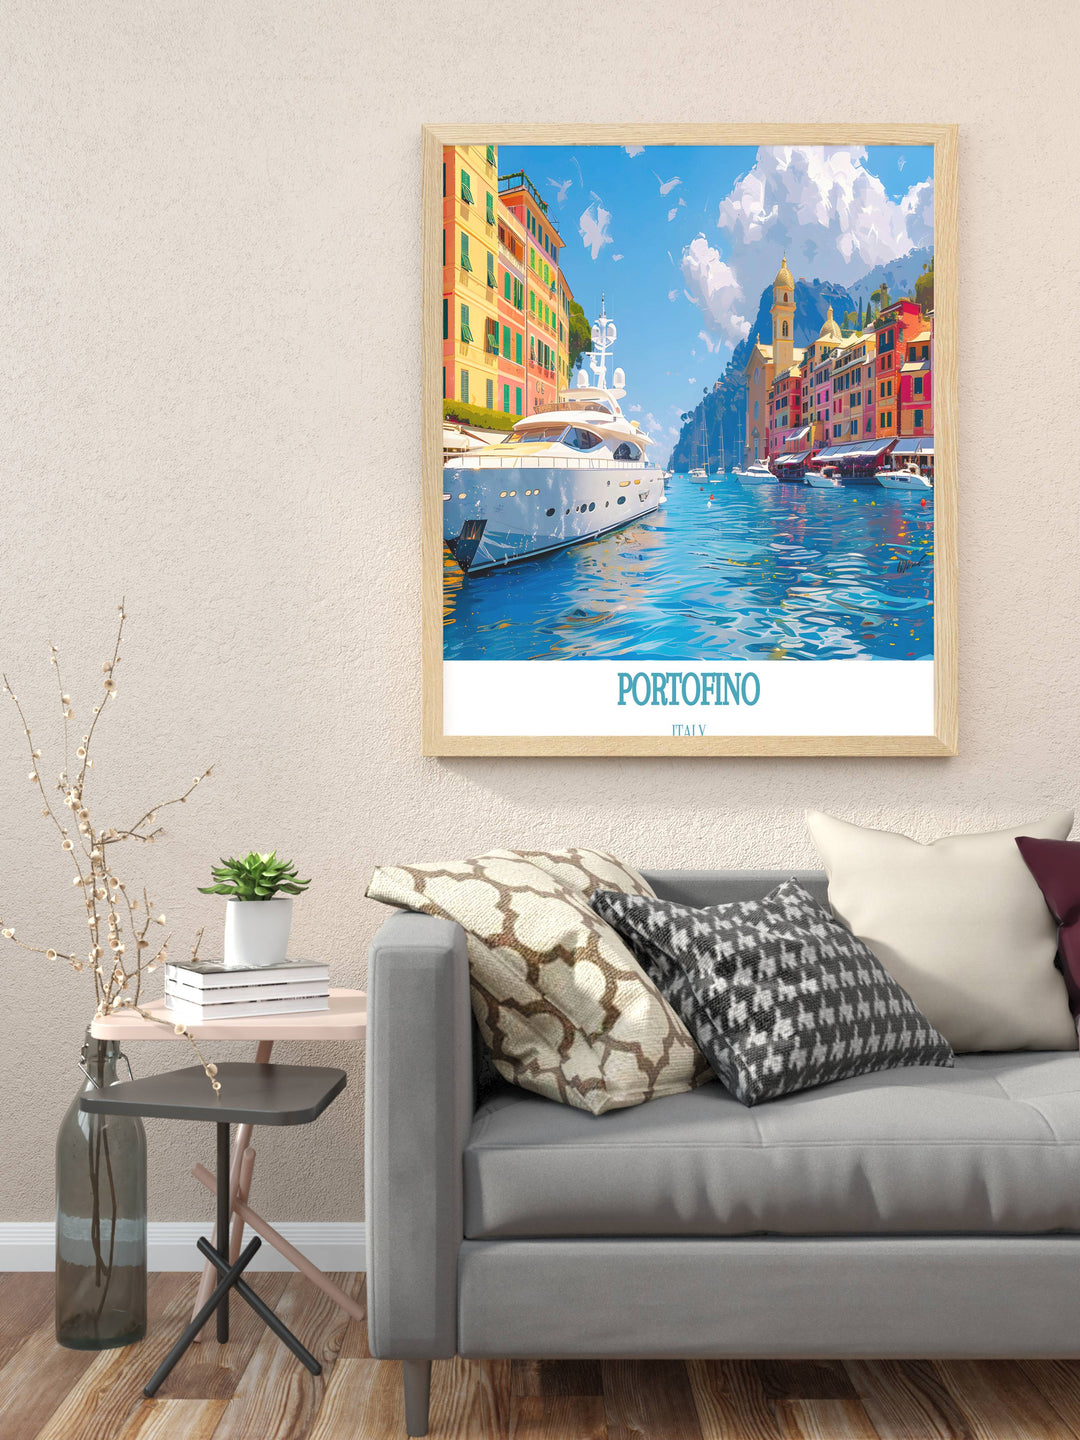 Italian Riviera Art highlighting the beauty of Portofino, with prints showcasing the colorful houses, lush landscapes, and tranquil harbor.